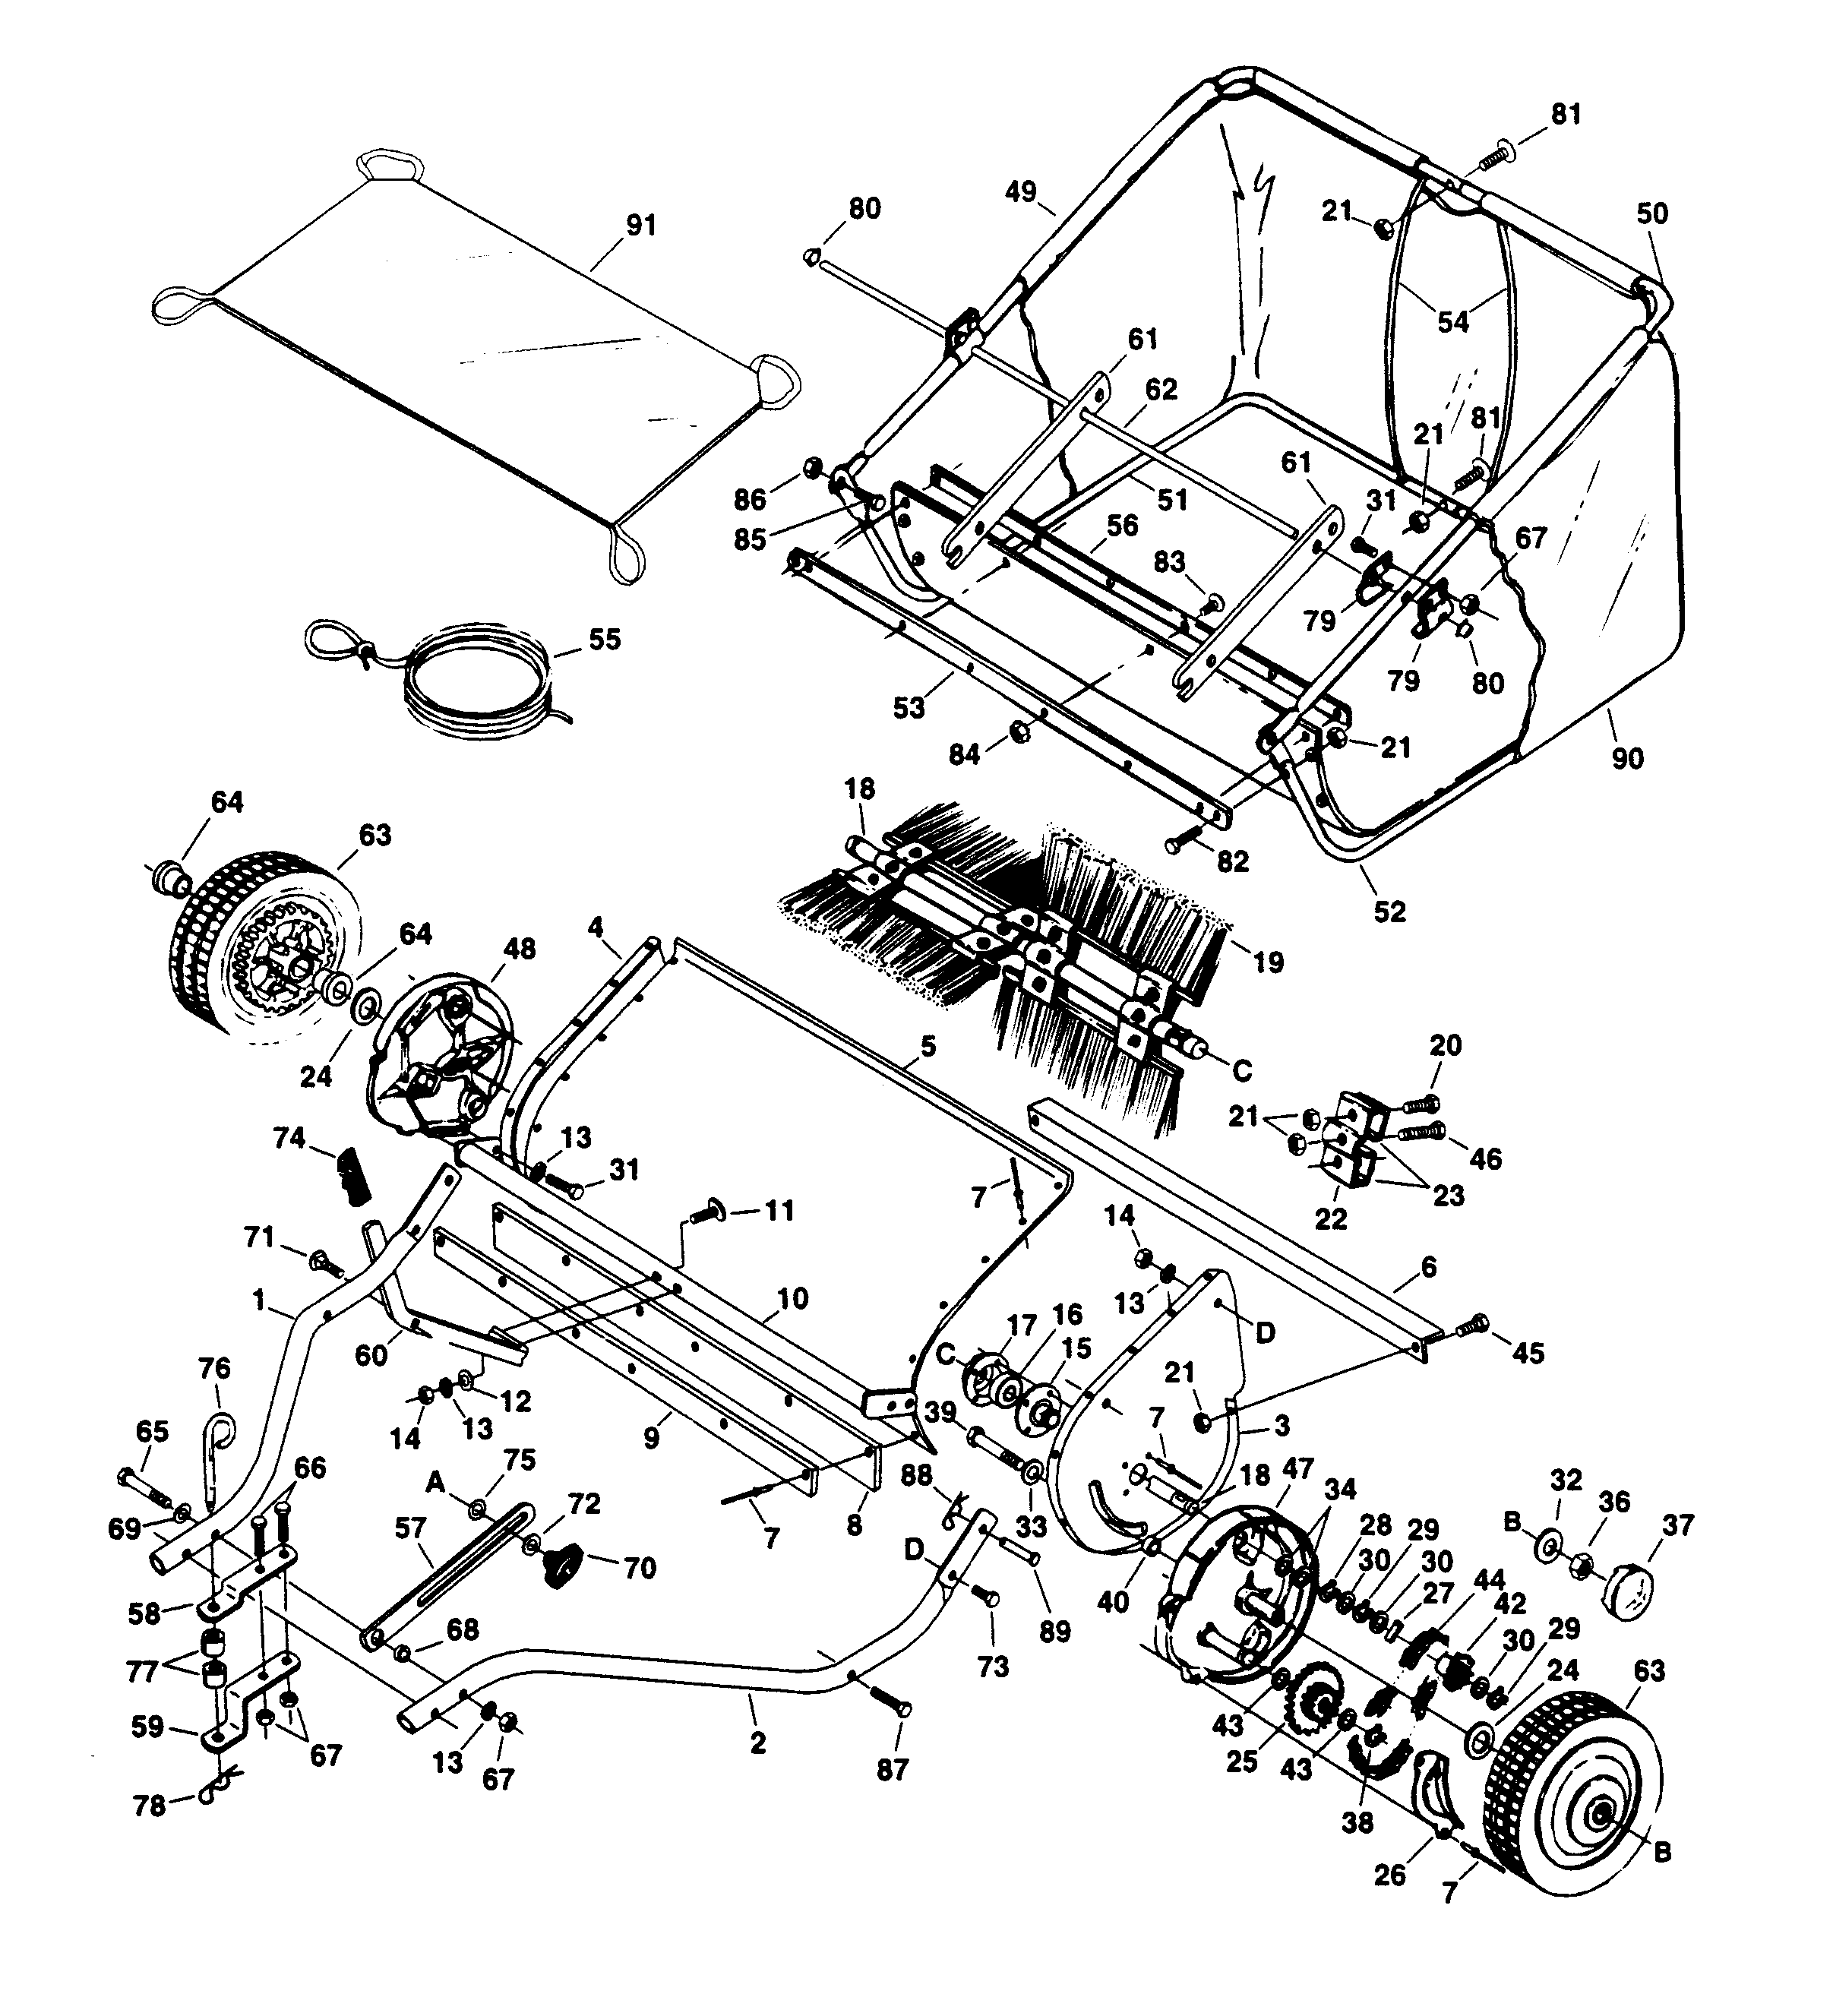 Chassis and appendix 531007410, 531007412, 531002808, 531002809, 531007414, 531007415, 722787003, 506622201, 531007609, 531007419, 531002815, 531002816, 735116405, 873220500, 506620201, 531002817, 506620401, 506620501, 531007421, 729237051, 531007629, 506620601, 506620701, 531002741, 506621701, 506621801, 506621901, 506632301, 506622401, 577731701, 596030501, 734117341, 734117201, 506624701, 506622901, 506623001, 506623101, 874610652, 506626601, 531002799, 506623501, 506623601, 531002745, 531002821, 531007626, 531002744, 531002743, 506623801, 506623901, 506624201, 506624301, 506621501, 506624401, 531002734, 506620901, 531002828, 531002772, 506621201, 531002831, 531007423, 531007425, 531002746, 506625401, 531002834, 531002835, 531007616, 531002836, 734115201, 506626001, 595901601, 734116401, 531007426, 506626401, 531002839, 506625601, 506626501, 721680251, 506626701, 531002840, 725237251, 725237471, 725232951, 732211401, 506625301, 596322601, 531002838, 531002843, 531004638, 506624001, 506624101, 531007450